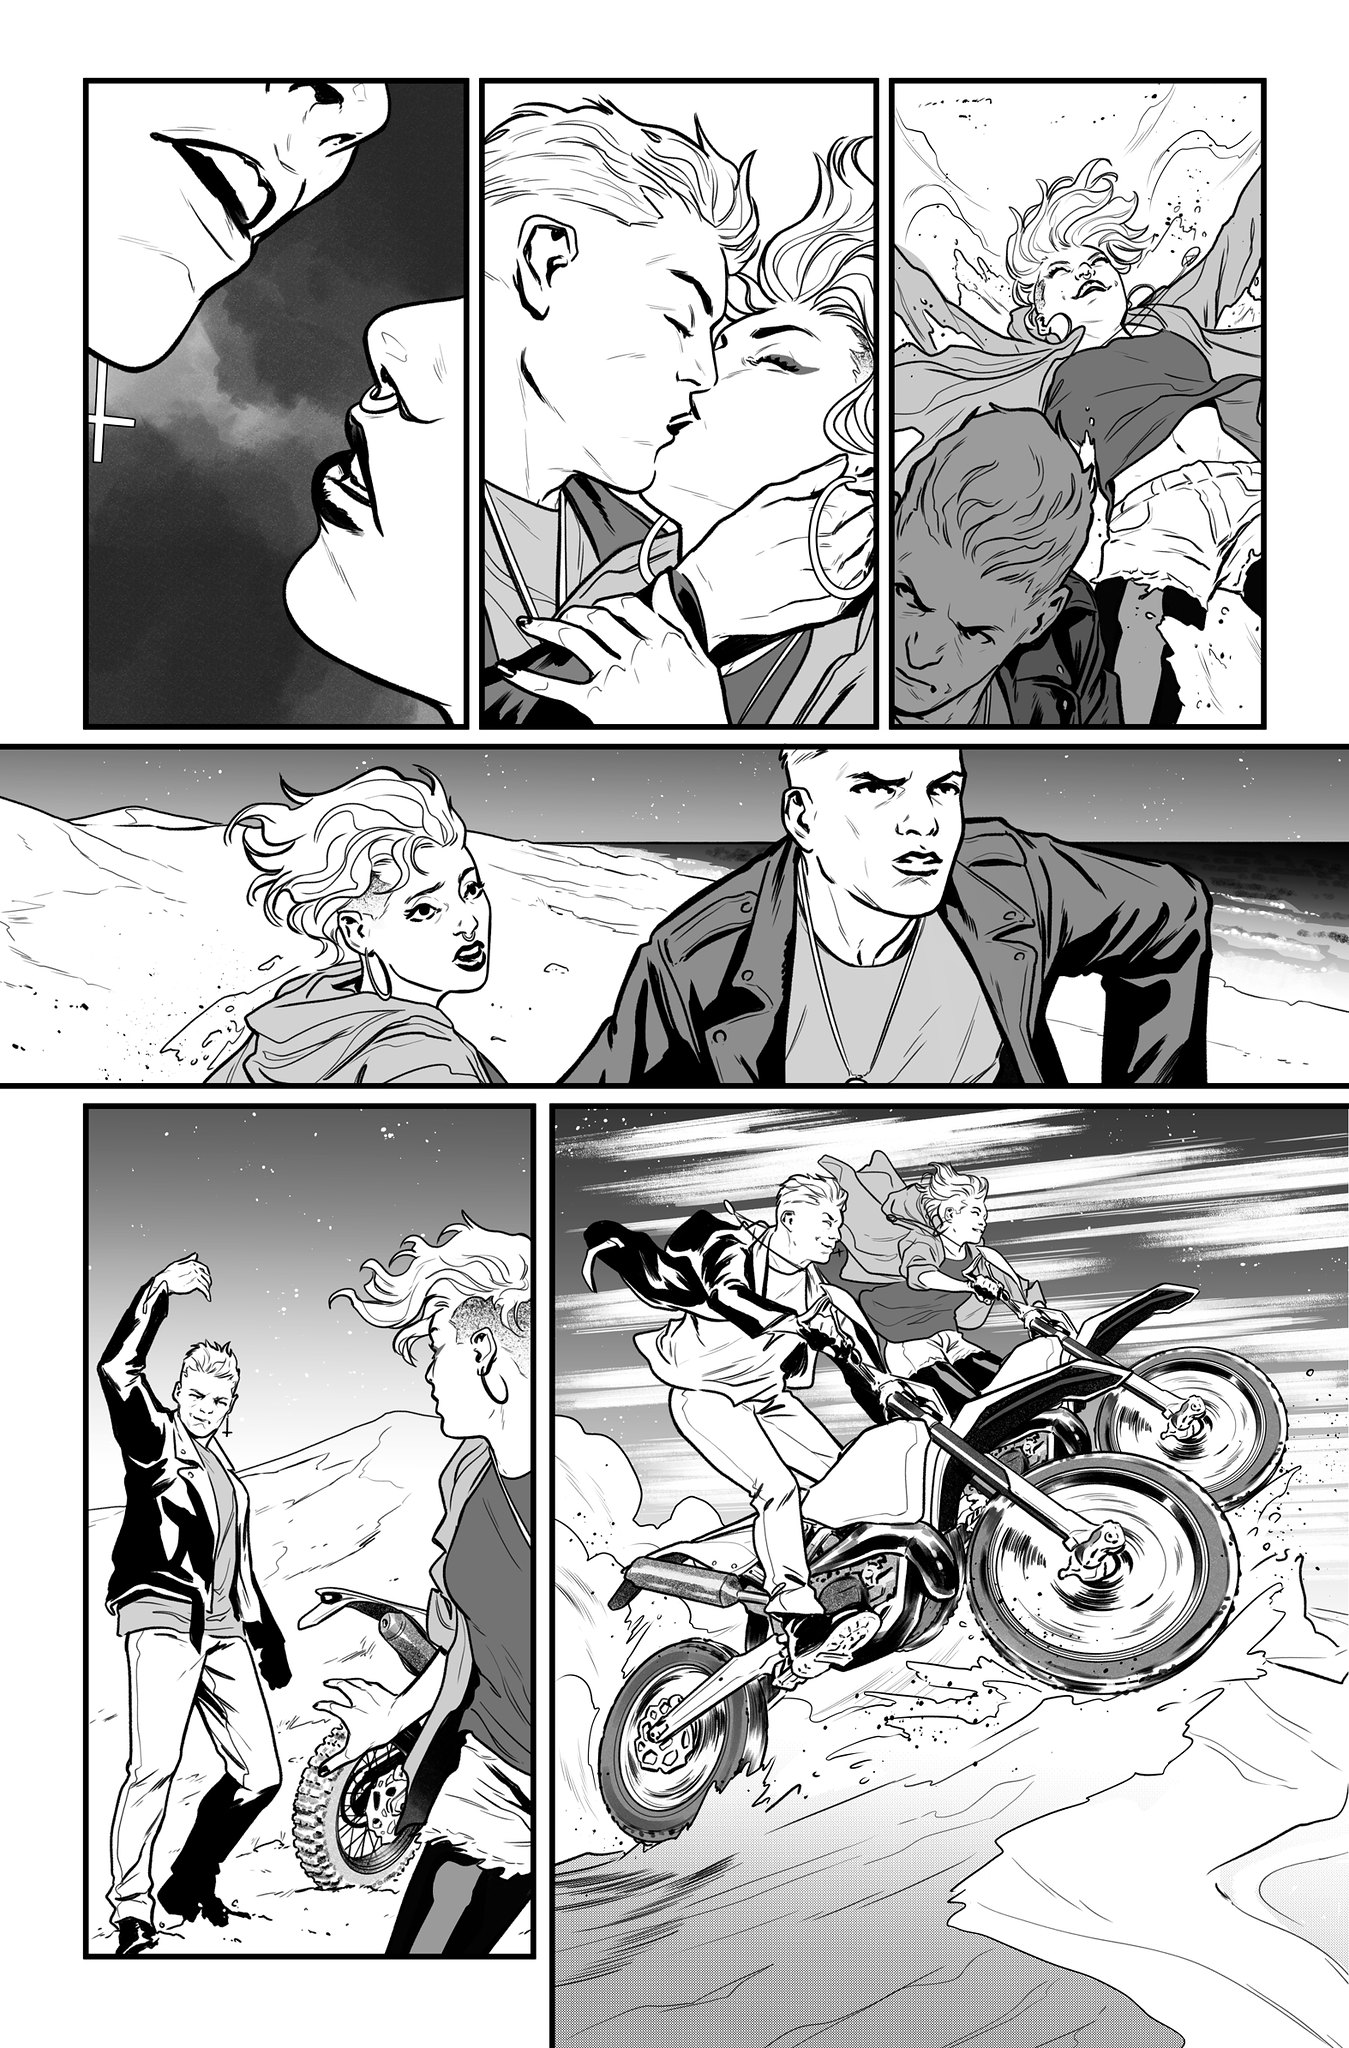 GHOSTRIDER#20_PAGE8_INKS